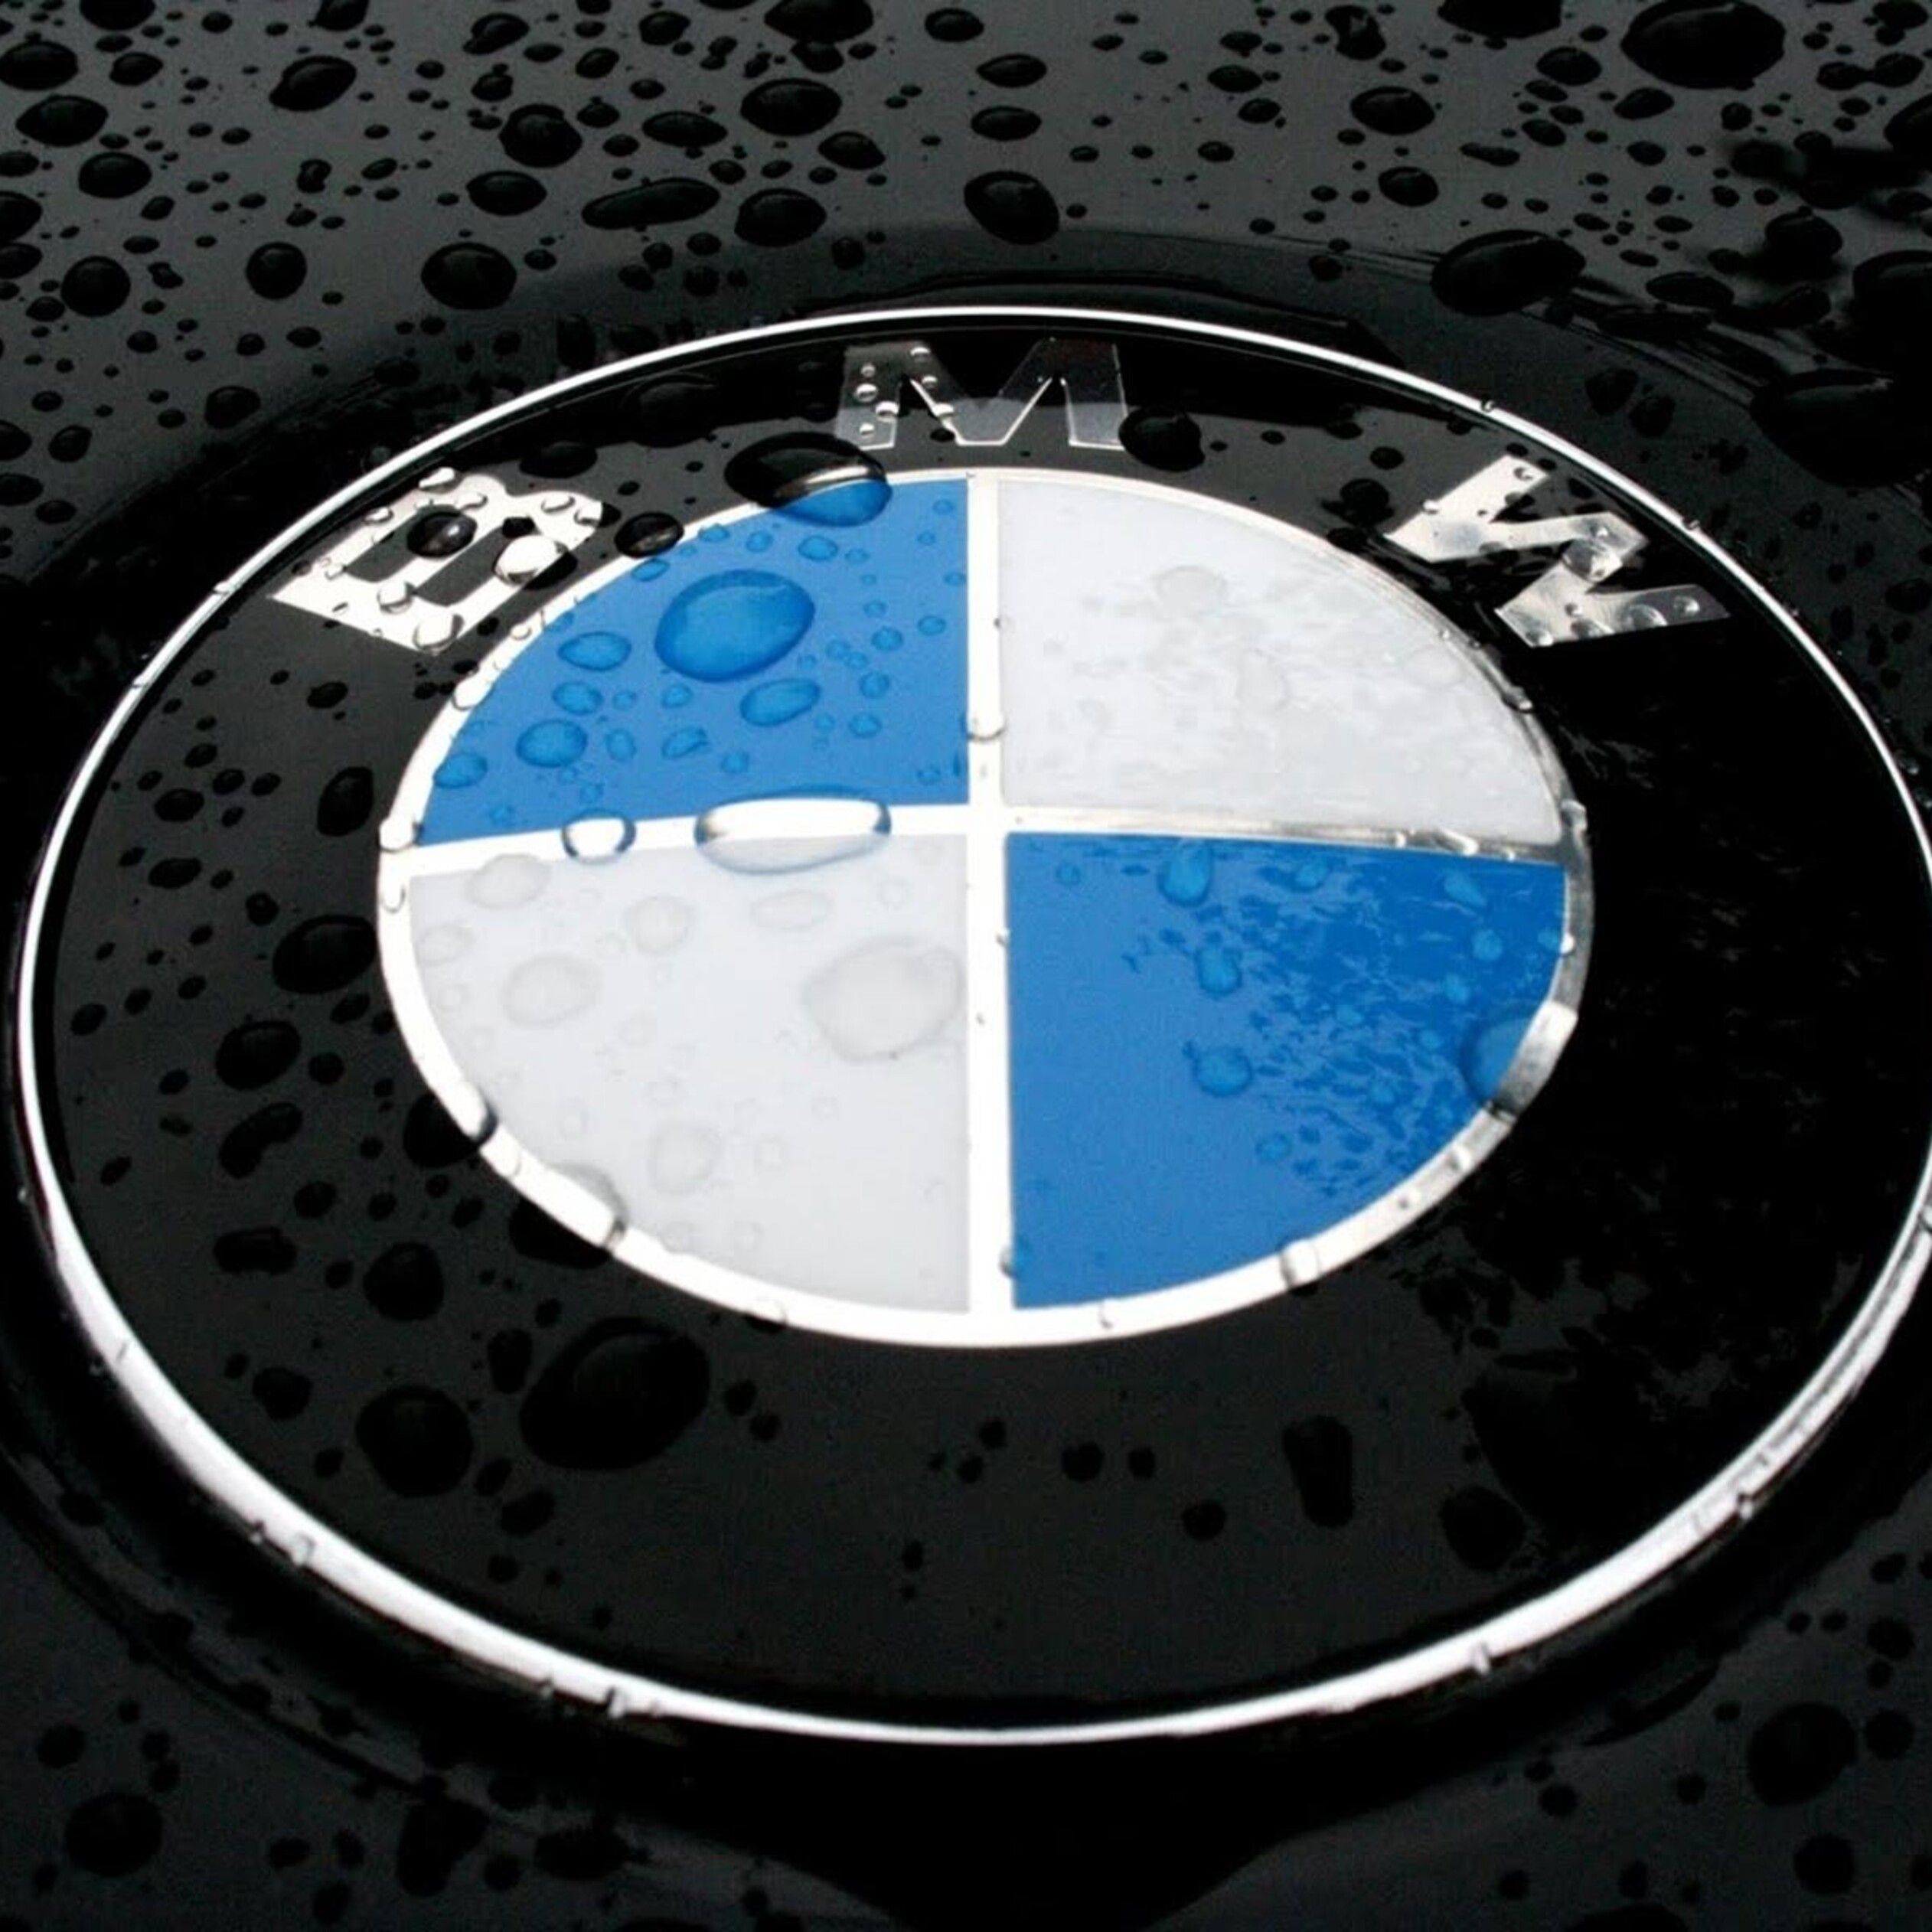 BMW symbol with water drops